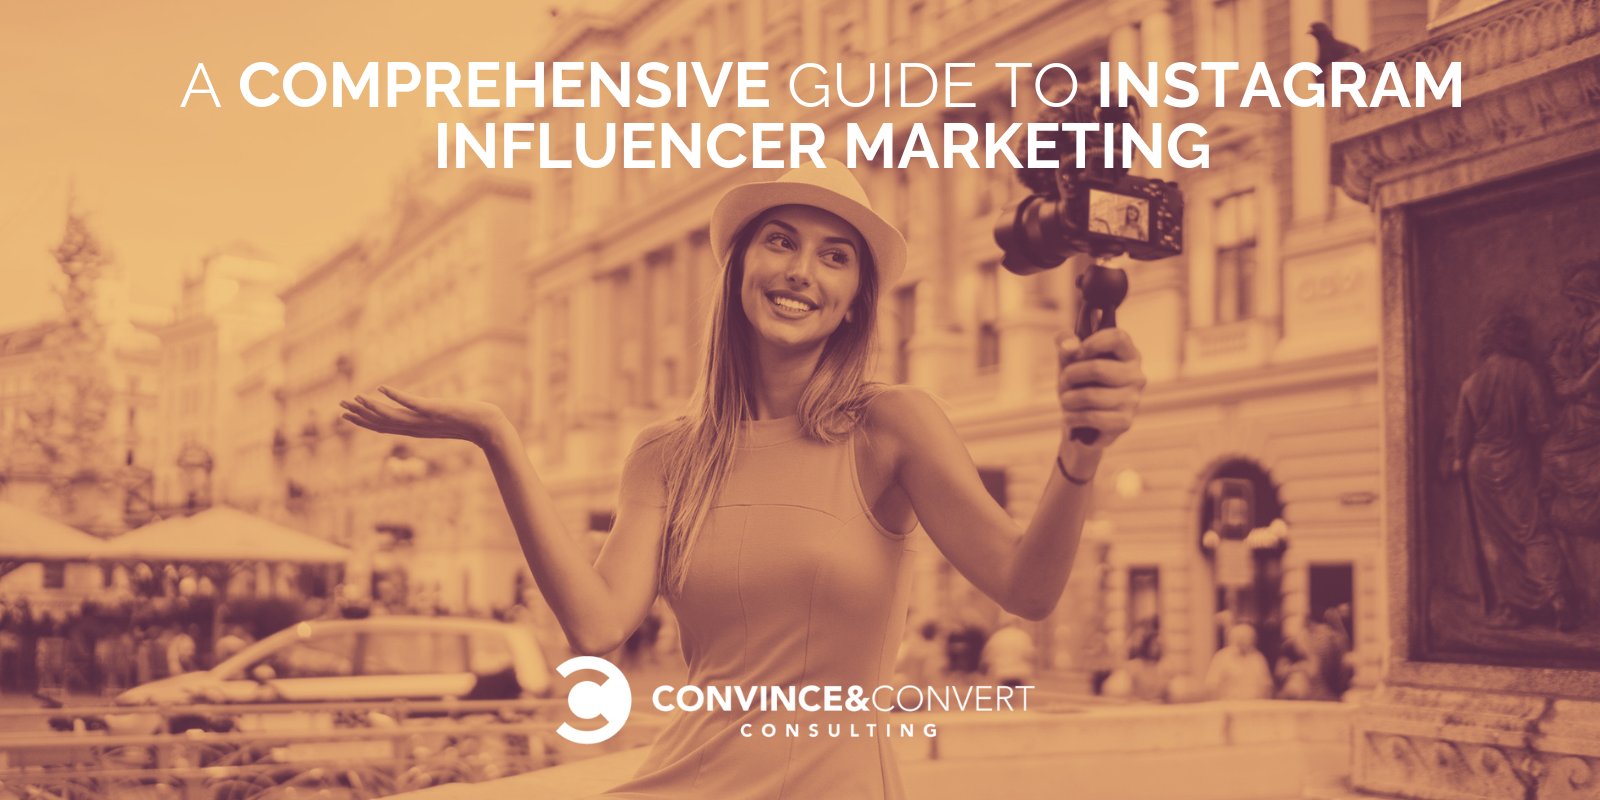 Guide to Influencer Marketing on Instagram